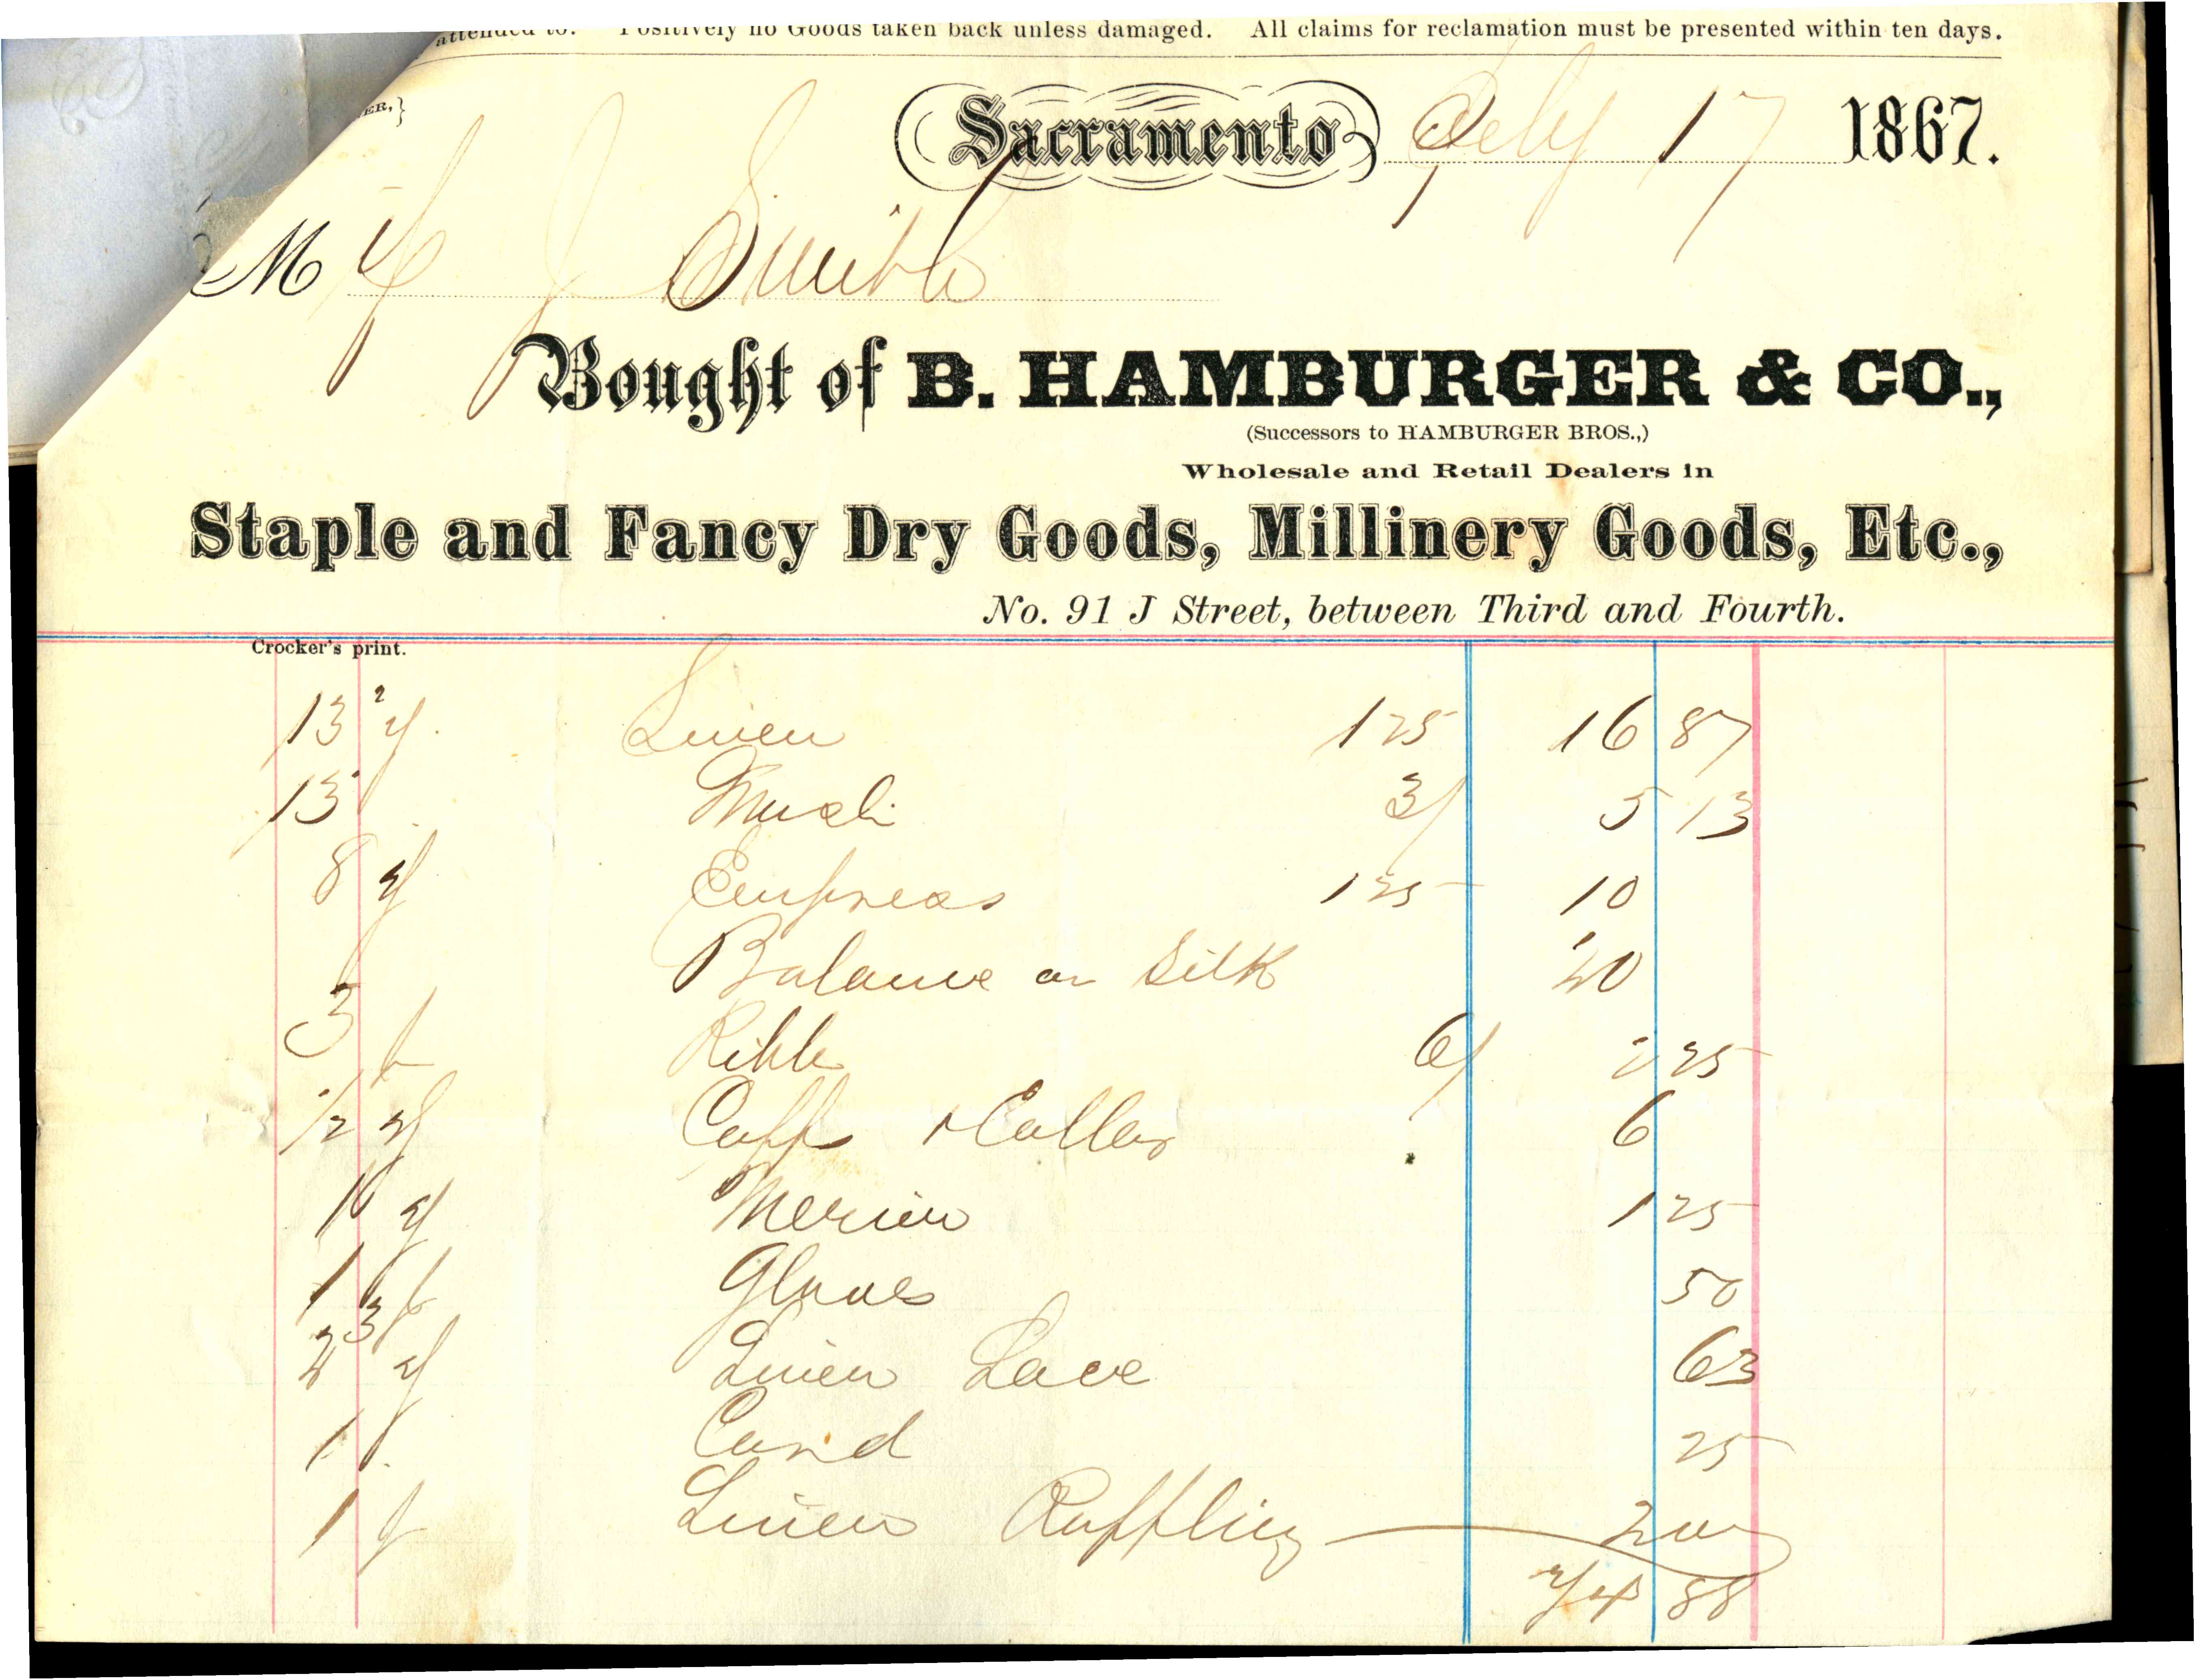 Receipt for millinery goods